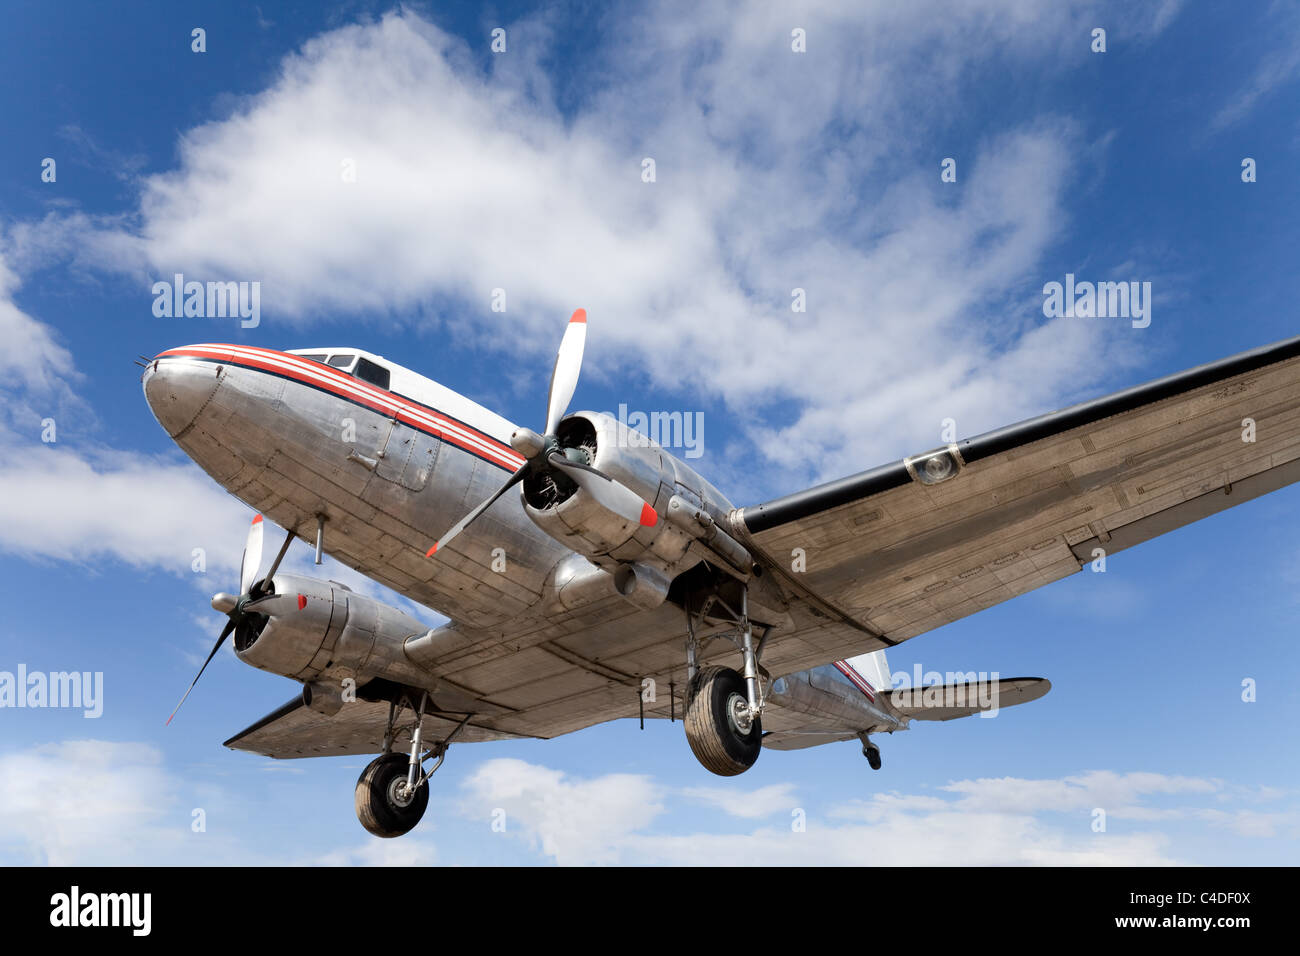 Old DC-3 propeller aircraft, beautifully restored and preserved Stock Photo